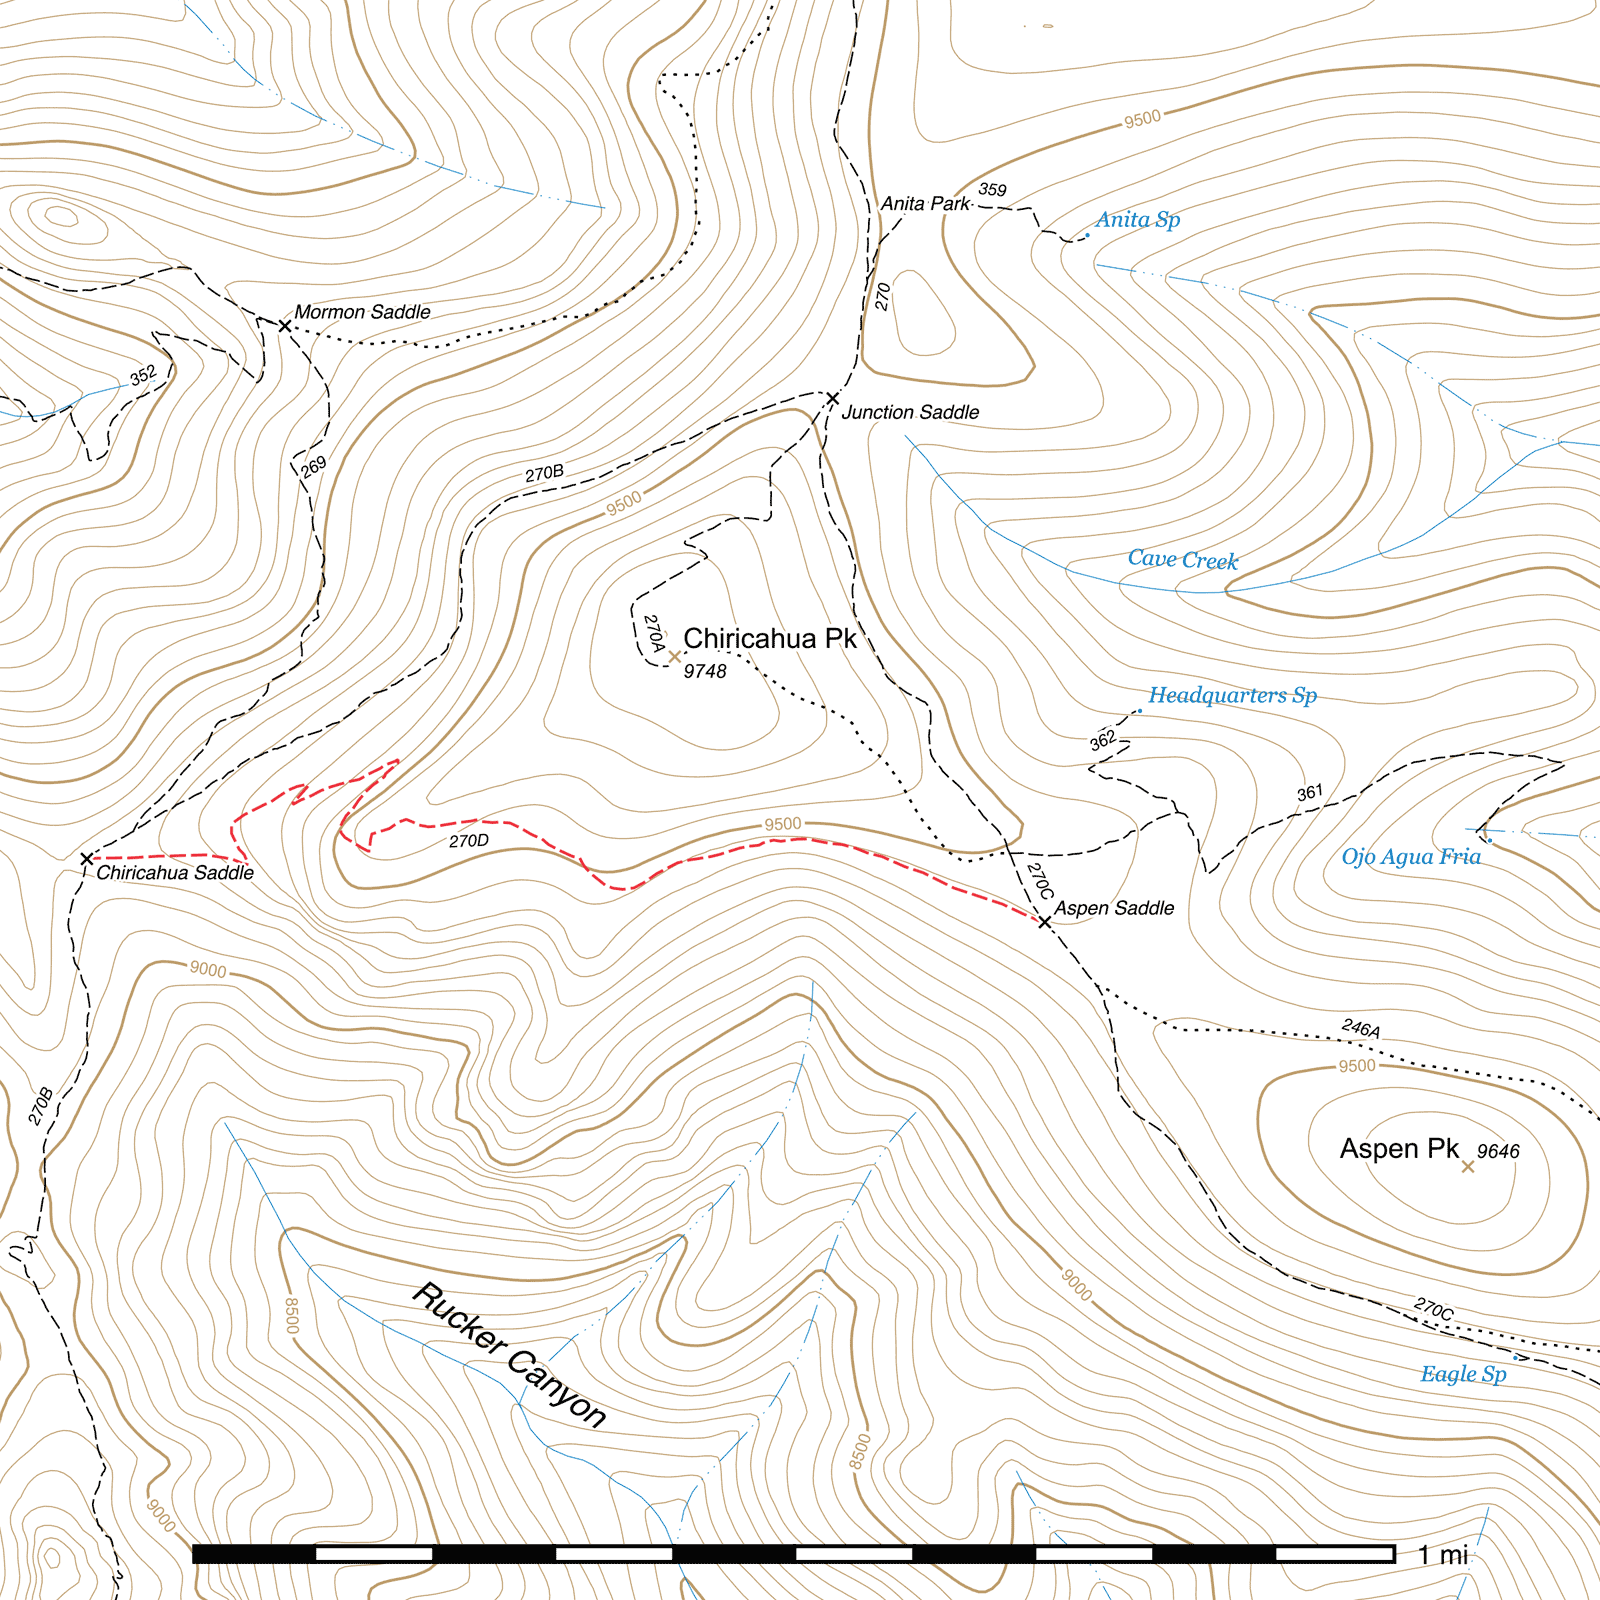 Topographic map of Crest Trail - Chiricahua Peak Bypass #270D